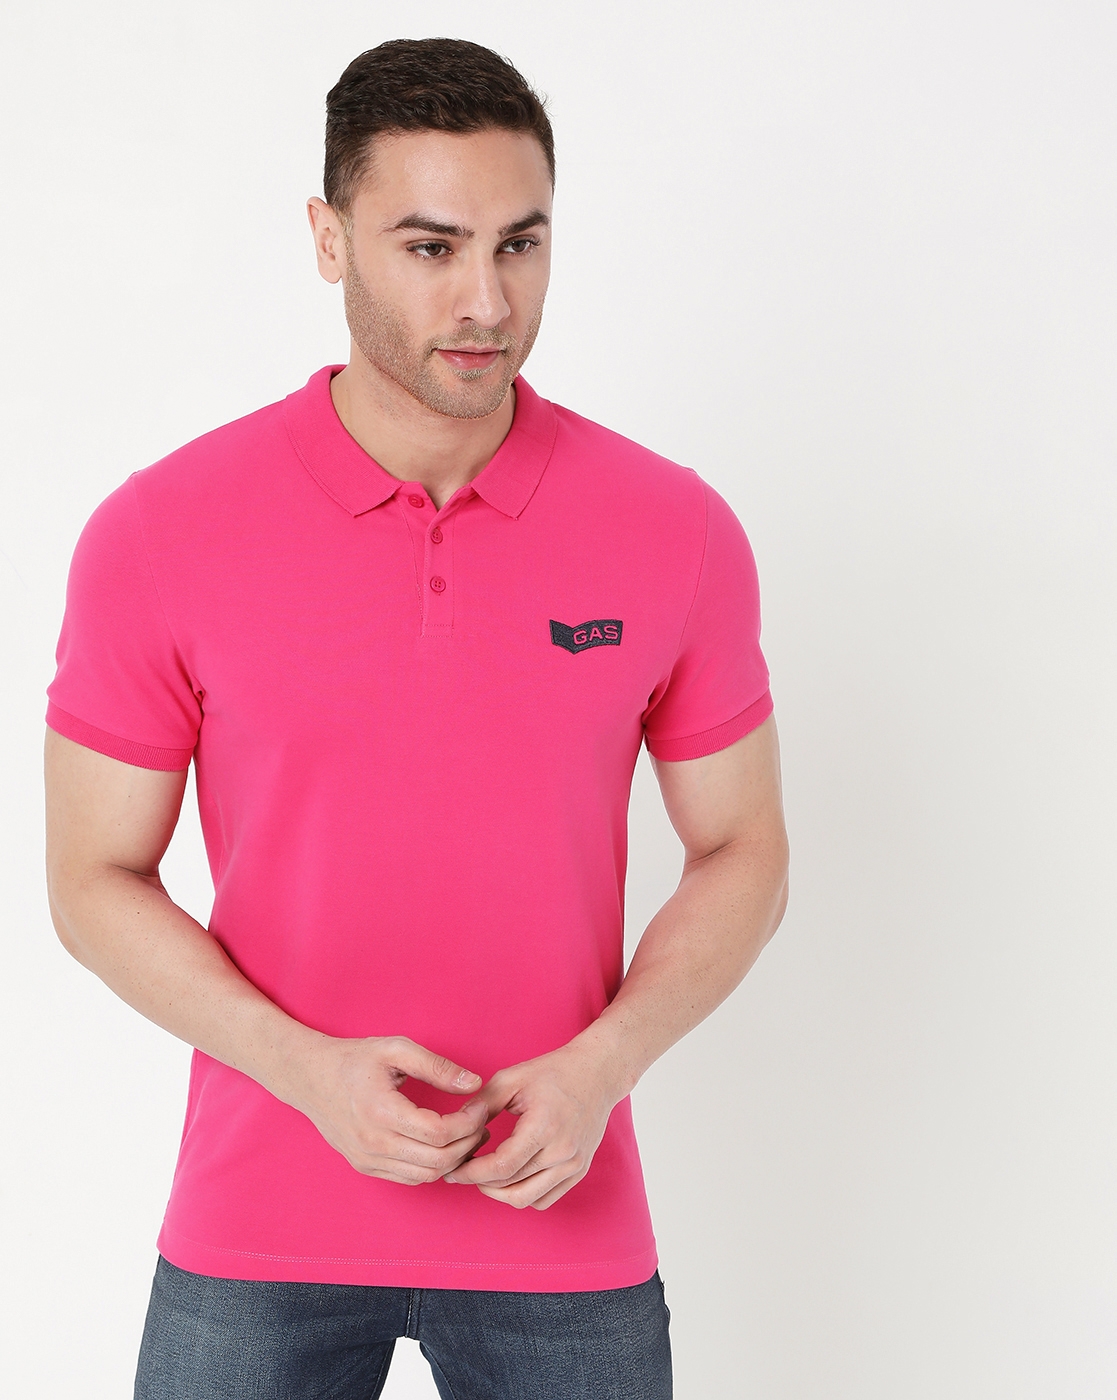 GAS | Men's Ralph Emb In Slim Fit Polo